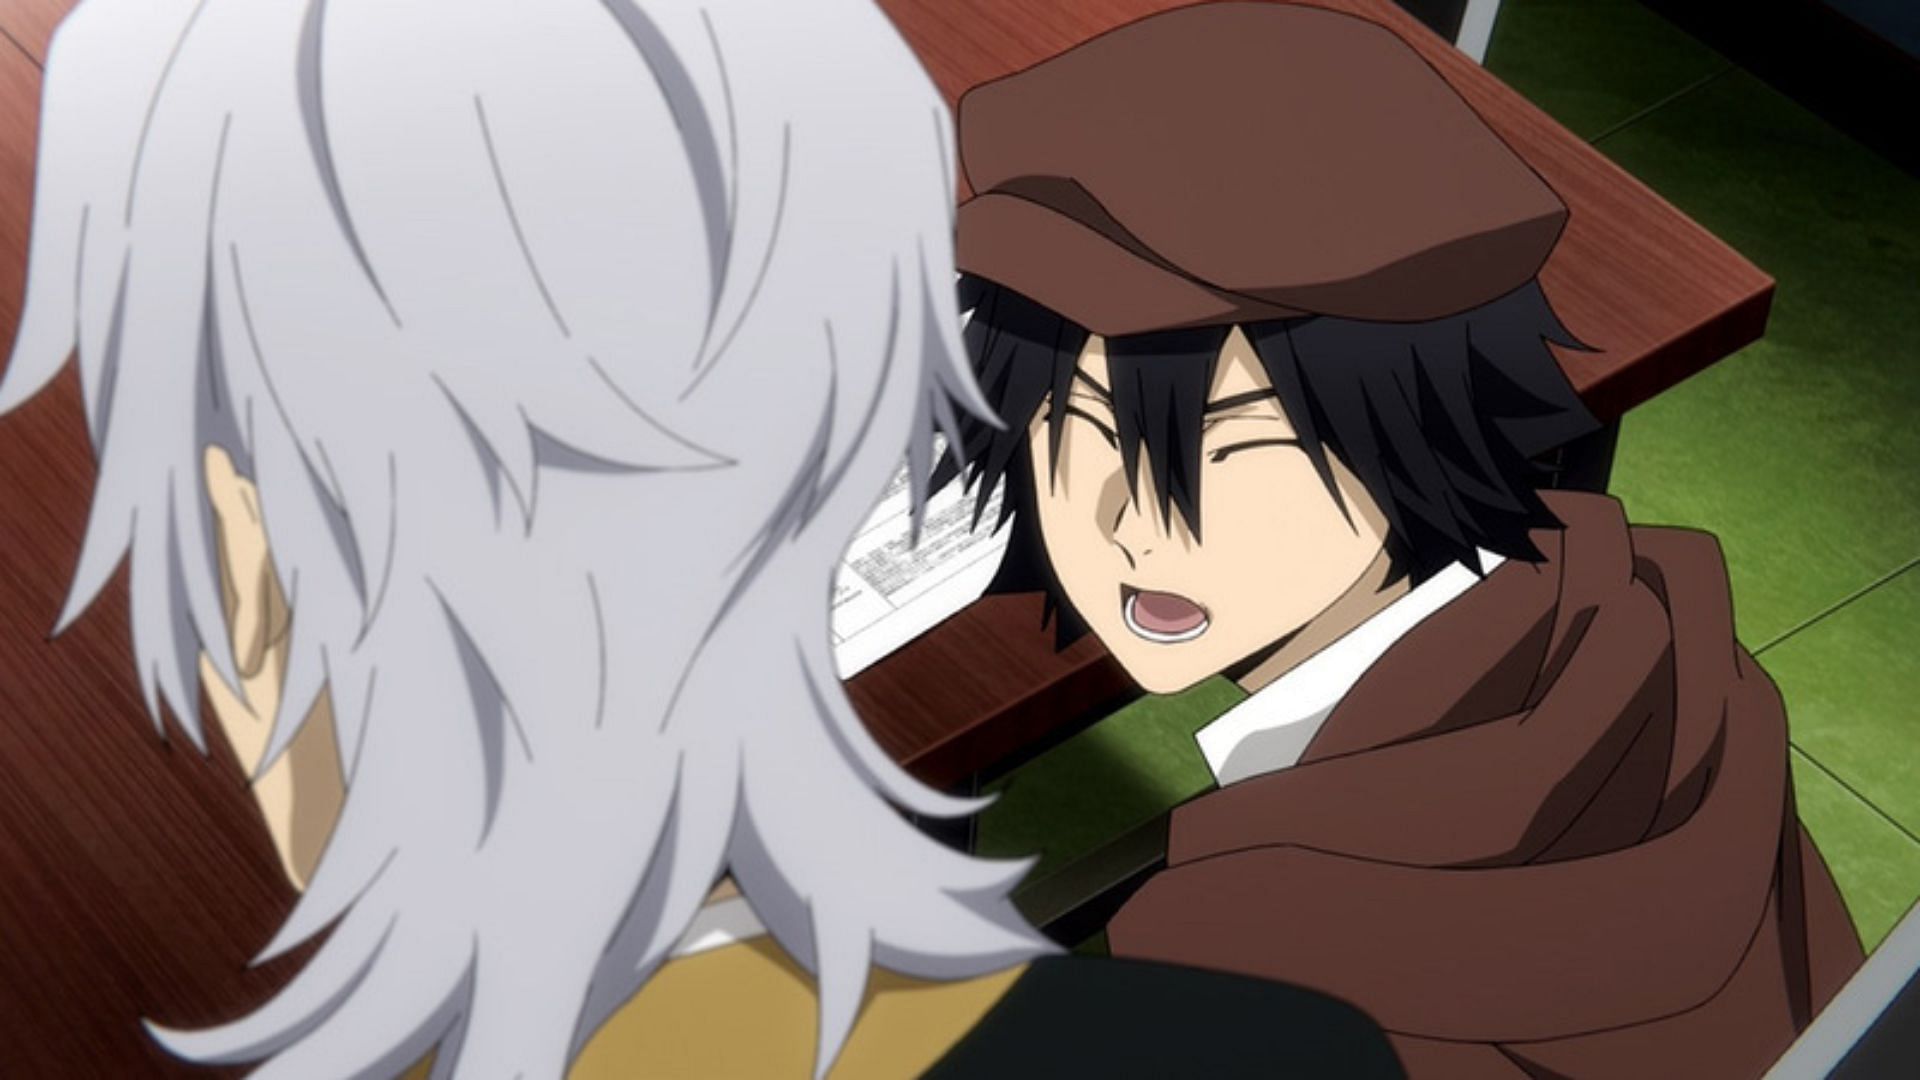 Bungo Stray Dogs Season 4 Ep 6: Release Date, Preview